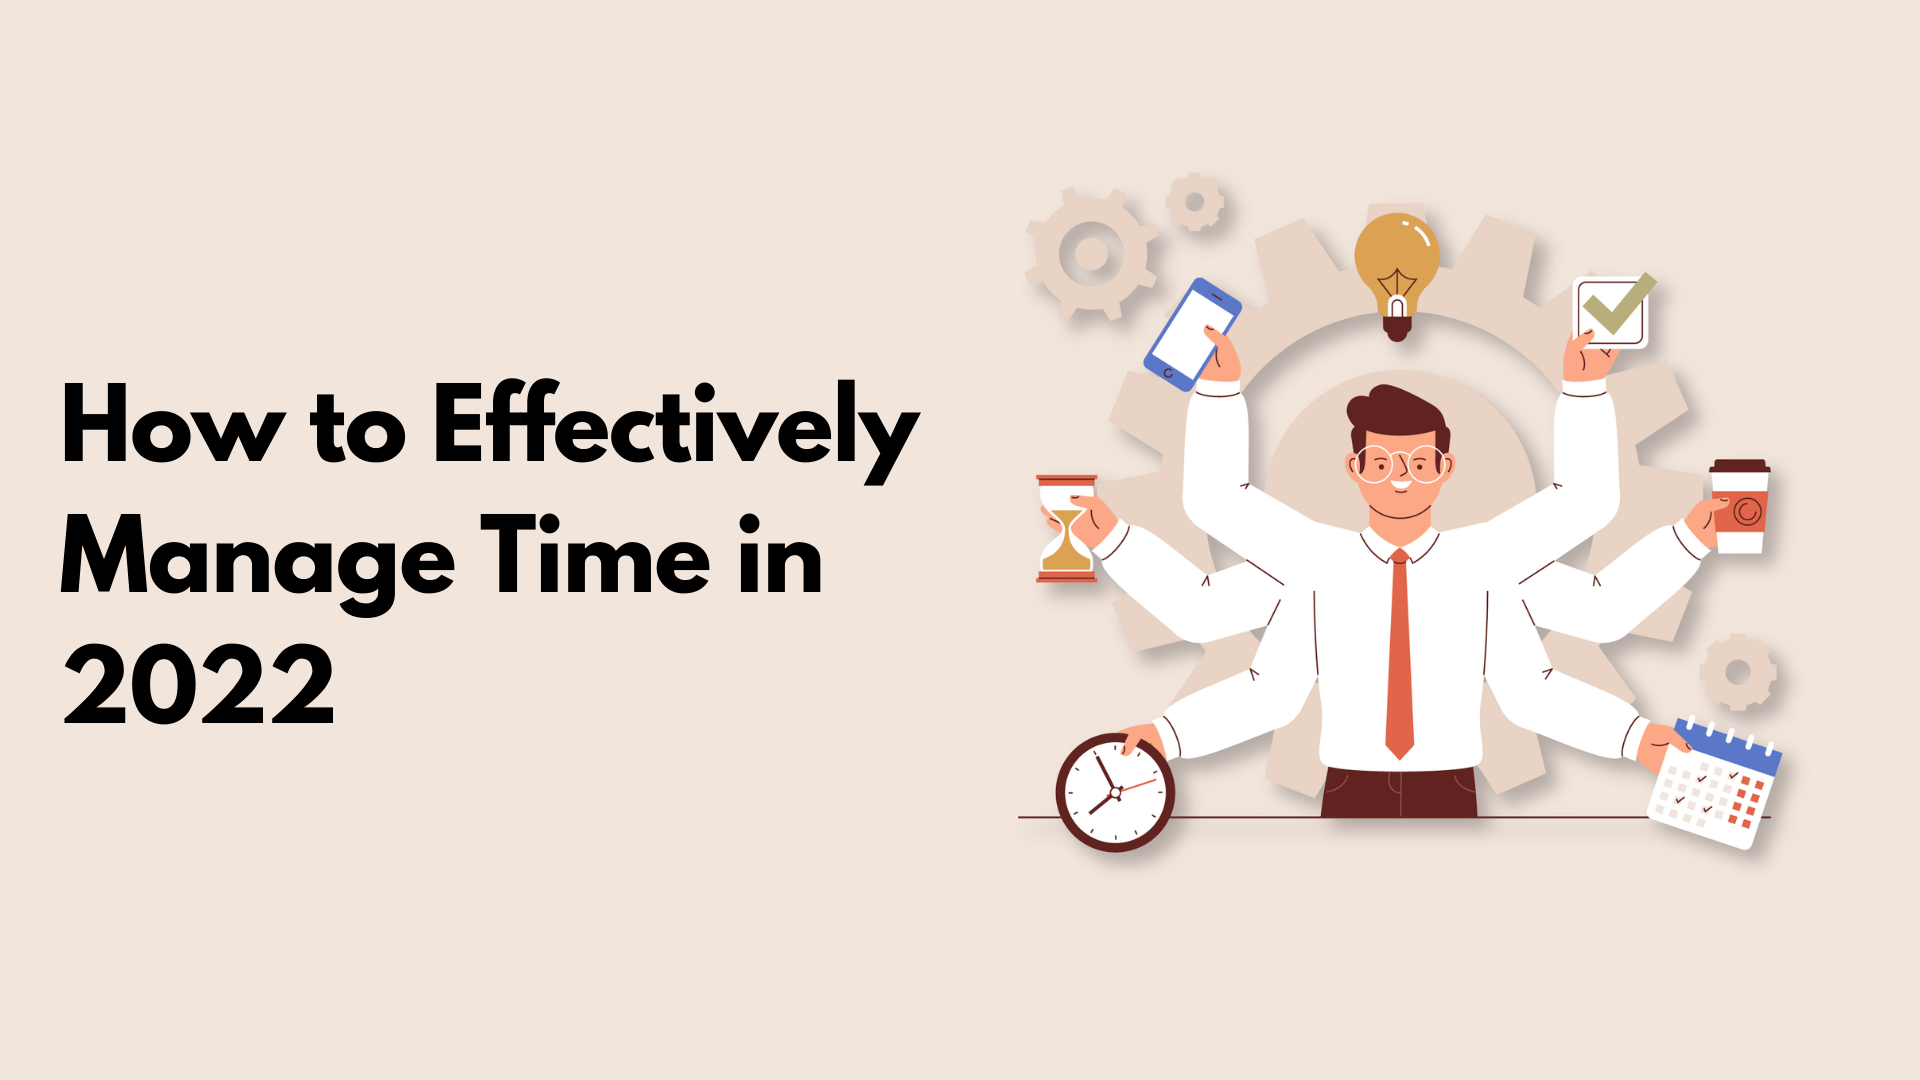 How to Effectively Manage Time in 2022